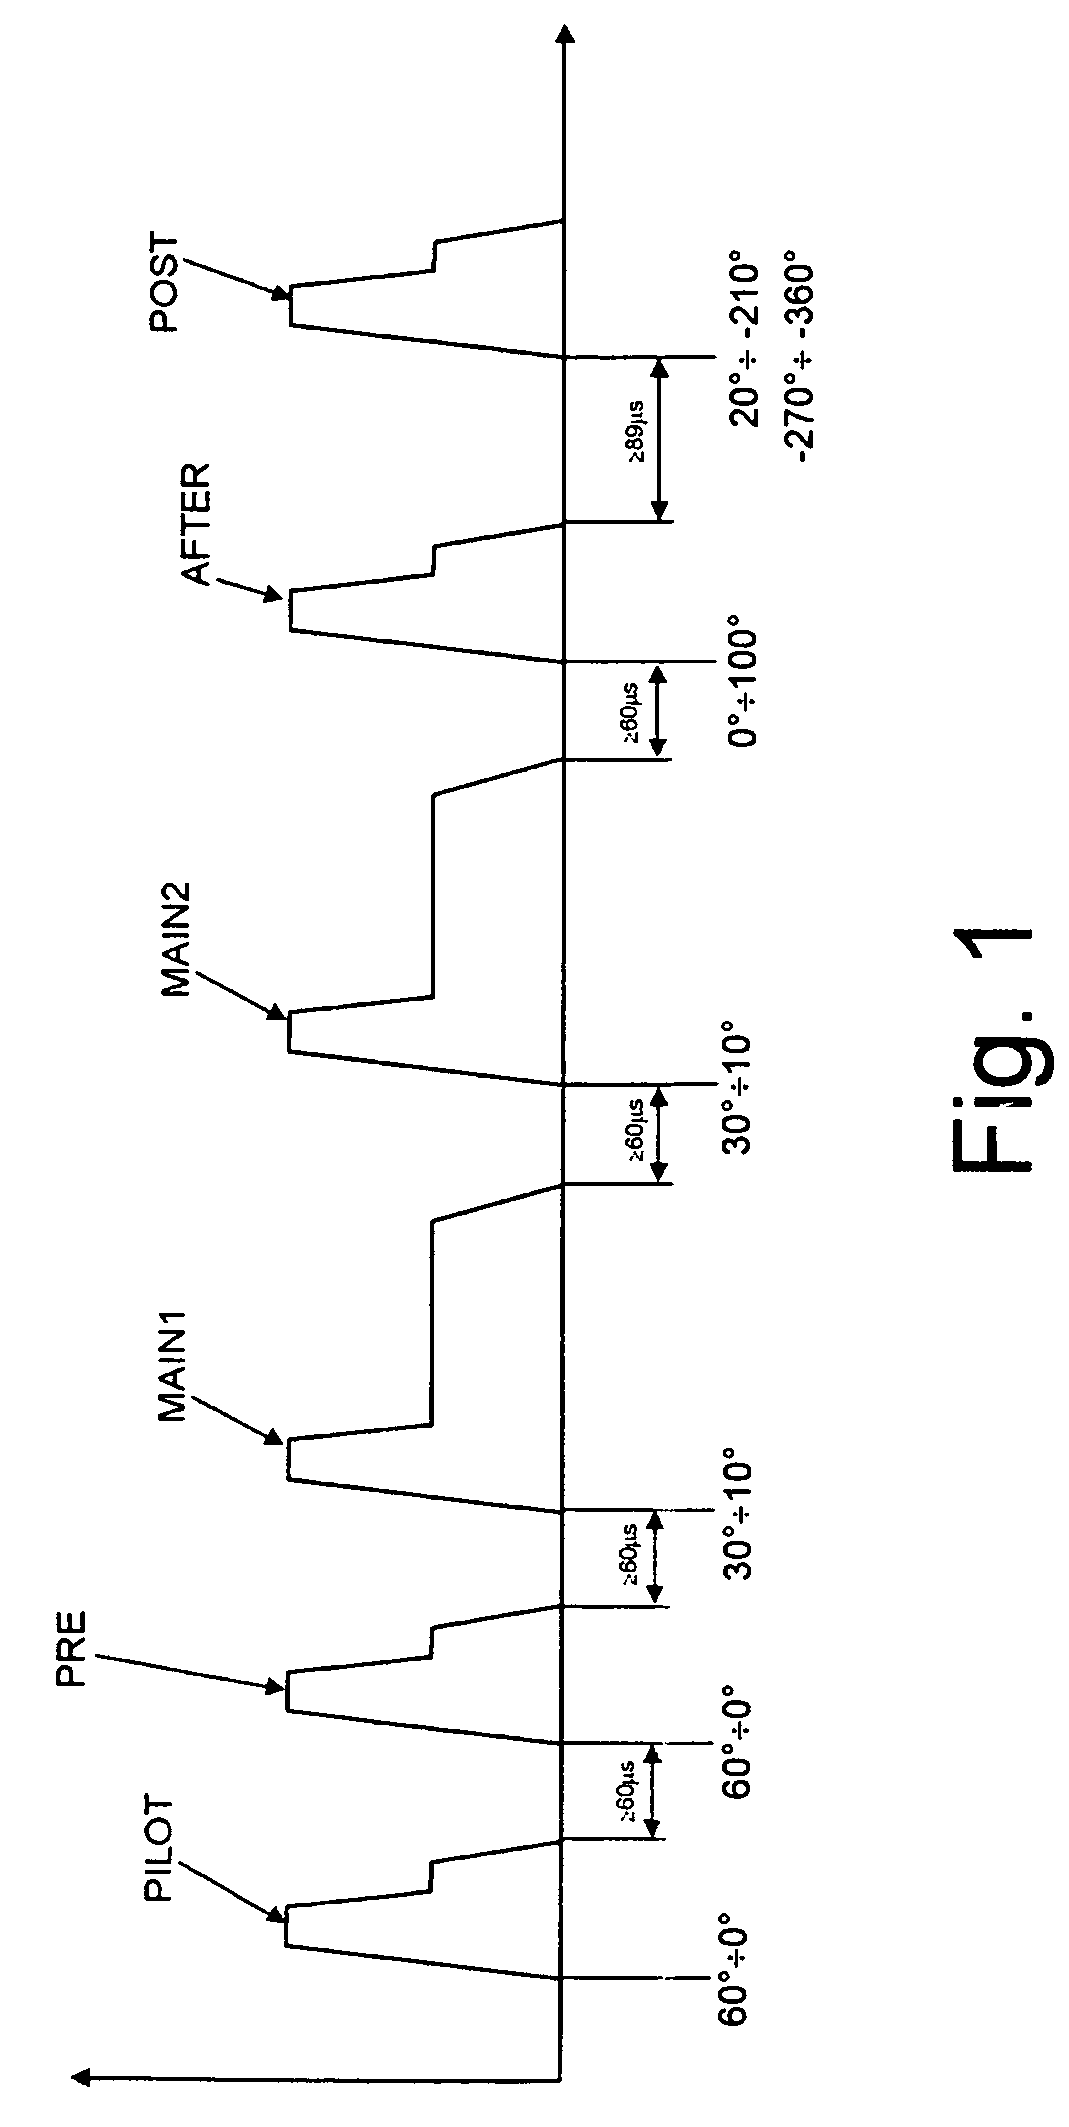 Method for activation of the regeneration of a particulate filter based on an estimate of the quantity of particulate accumulated in the particulate filter